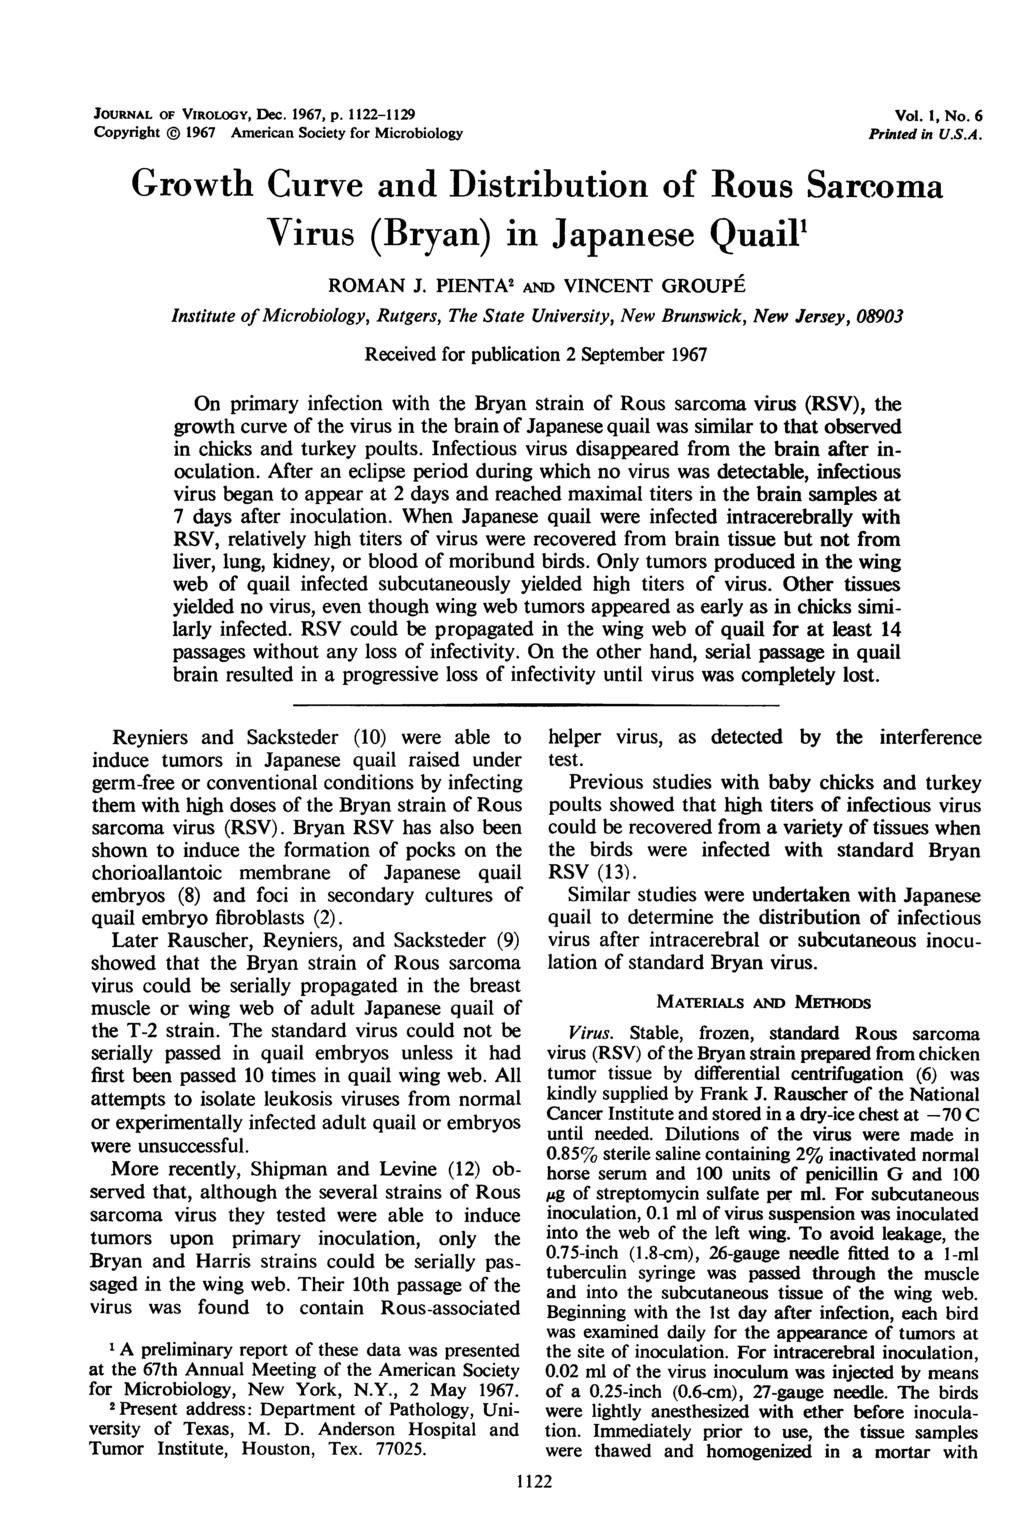 JOURNAL OF VIROLOGY, Dec. 1967, p. 1122-1129 Copyright ( 1967 American Society for Microbiology Growth Curve and Distribution of Rous Sarcoma Virus (Bryan) in Japanese Quail1 ROMAN J.